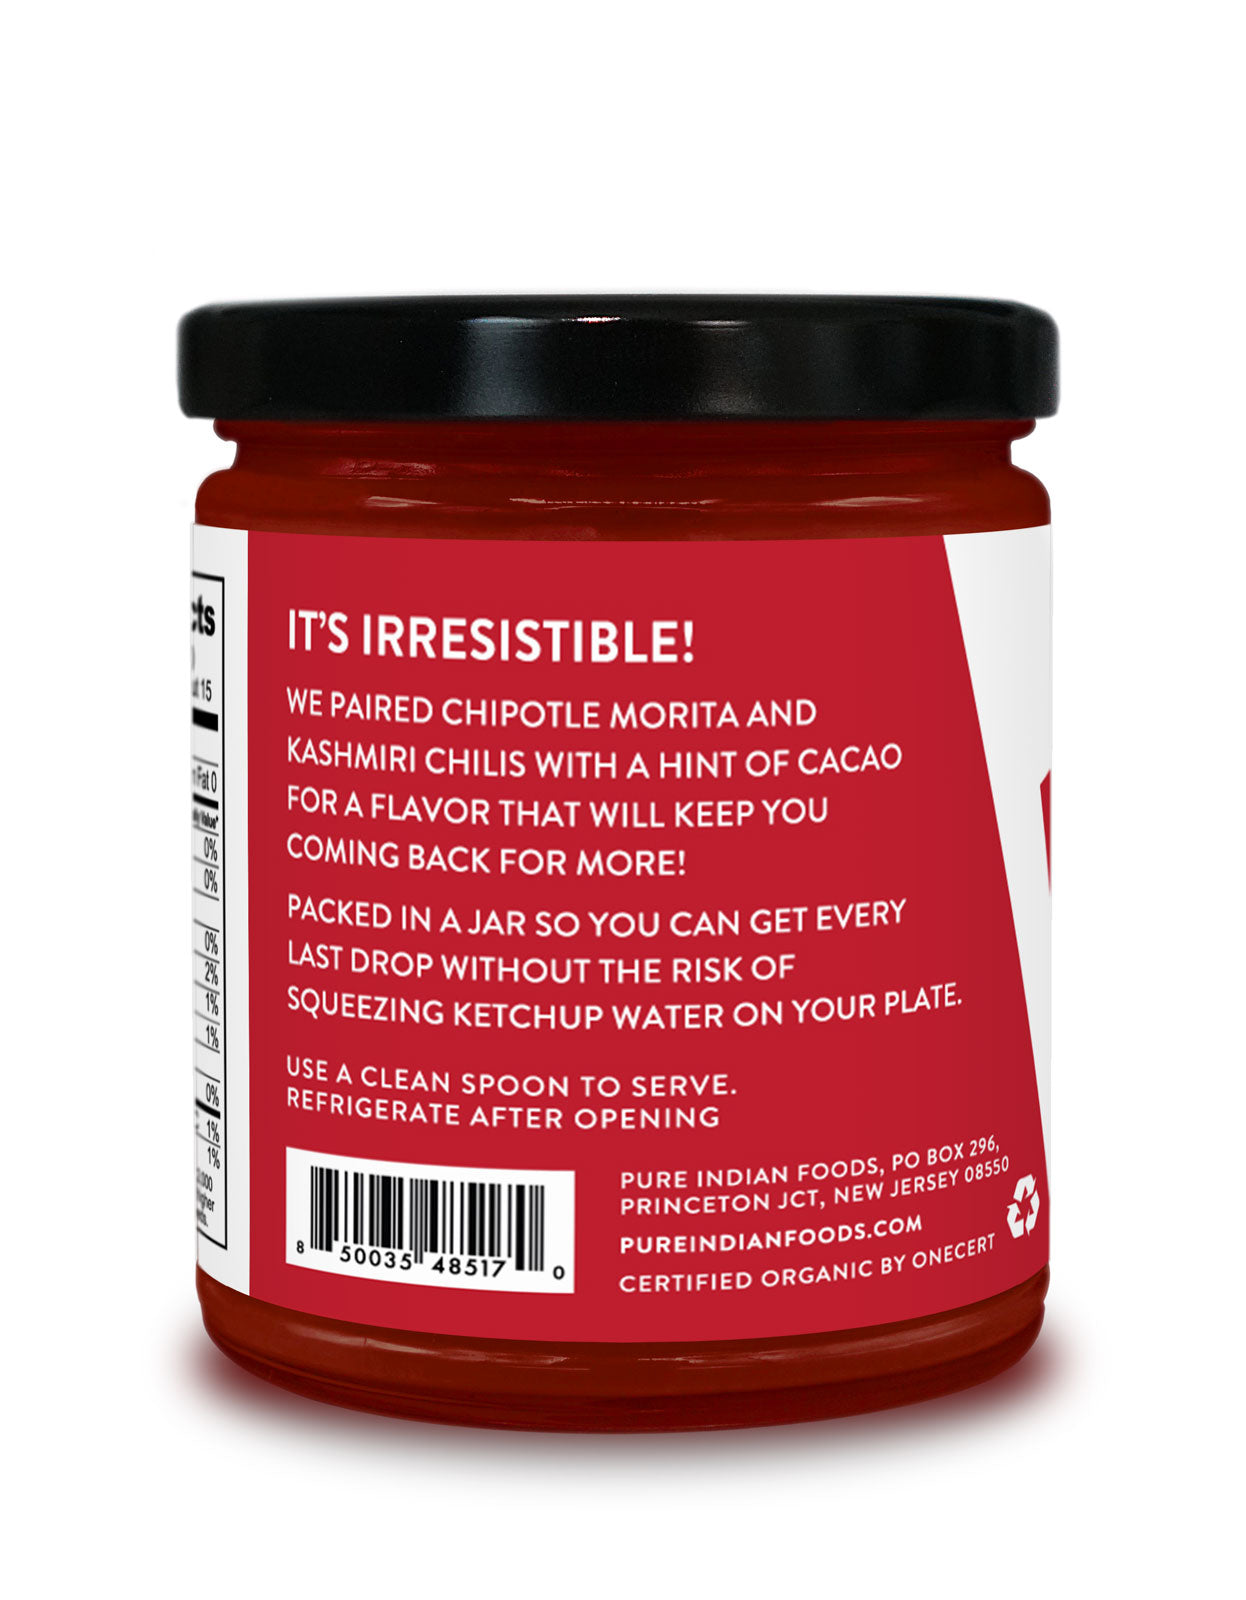 Side label on a jar of Pure Indian Foods KICK Ketchup, an organic ketchup made with a spicy twist. The label reads: It's irresistible! We paired chipotle morita and kashmiri chilis with a hint of cacao for a flavor that will keep you coming back for more! Packed in a jar so you can get ever last drop without the risk of squeezing ketchup water on your plate.